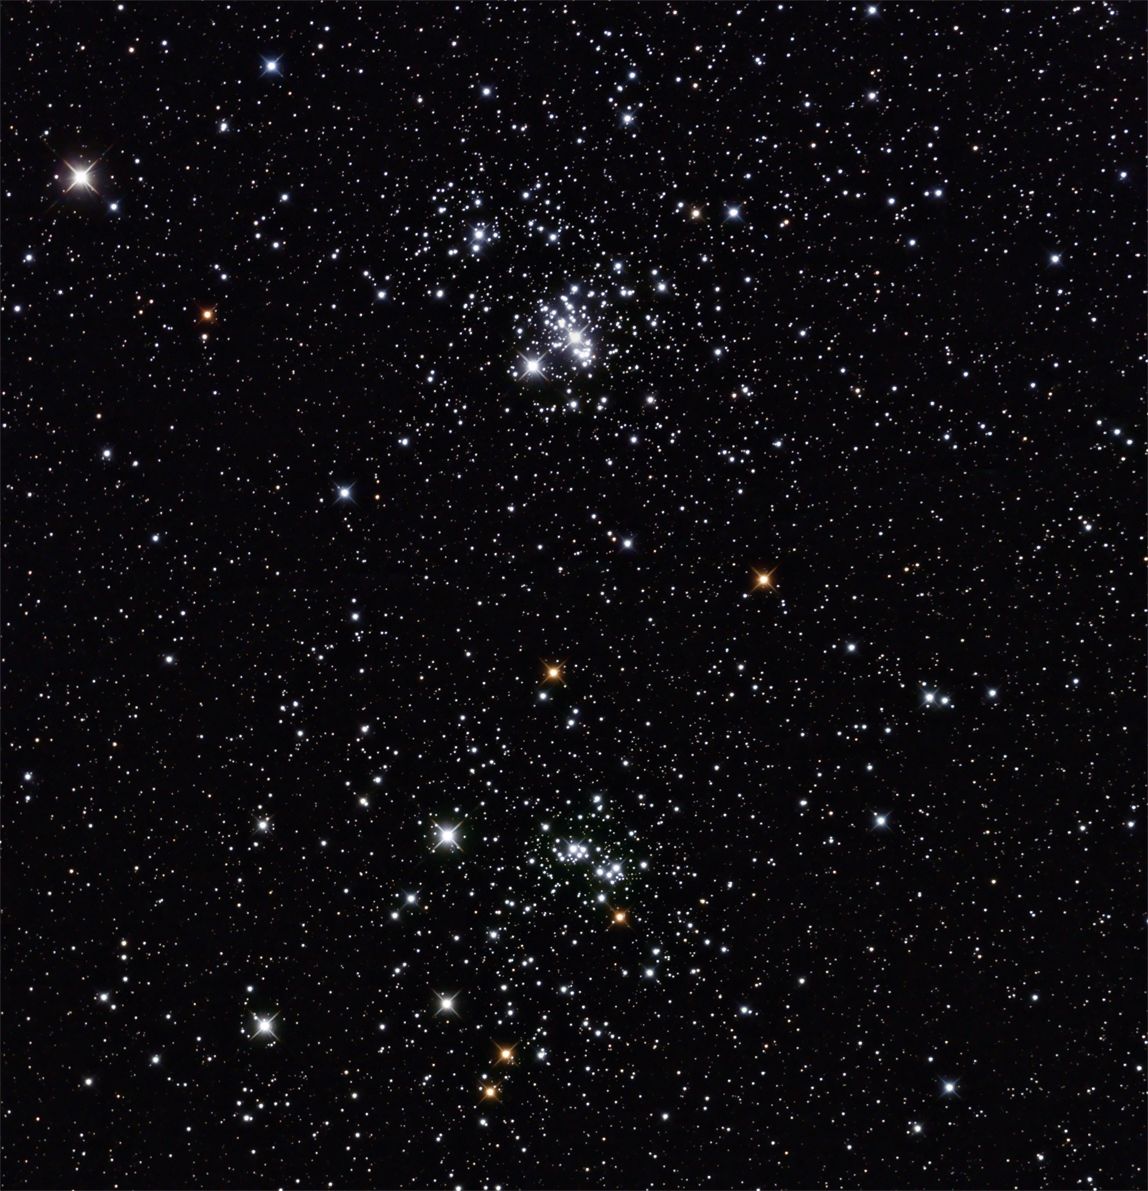 C14 - Double Cluster